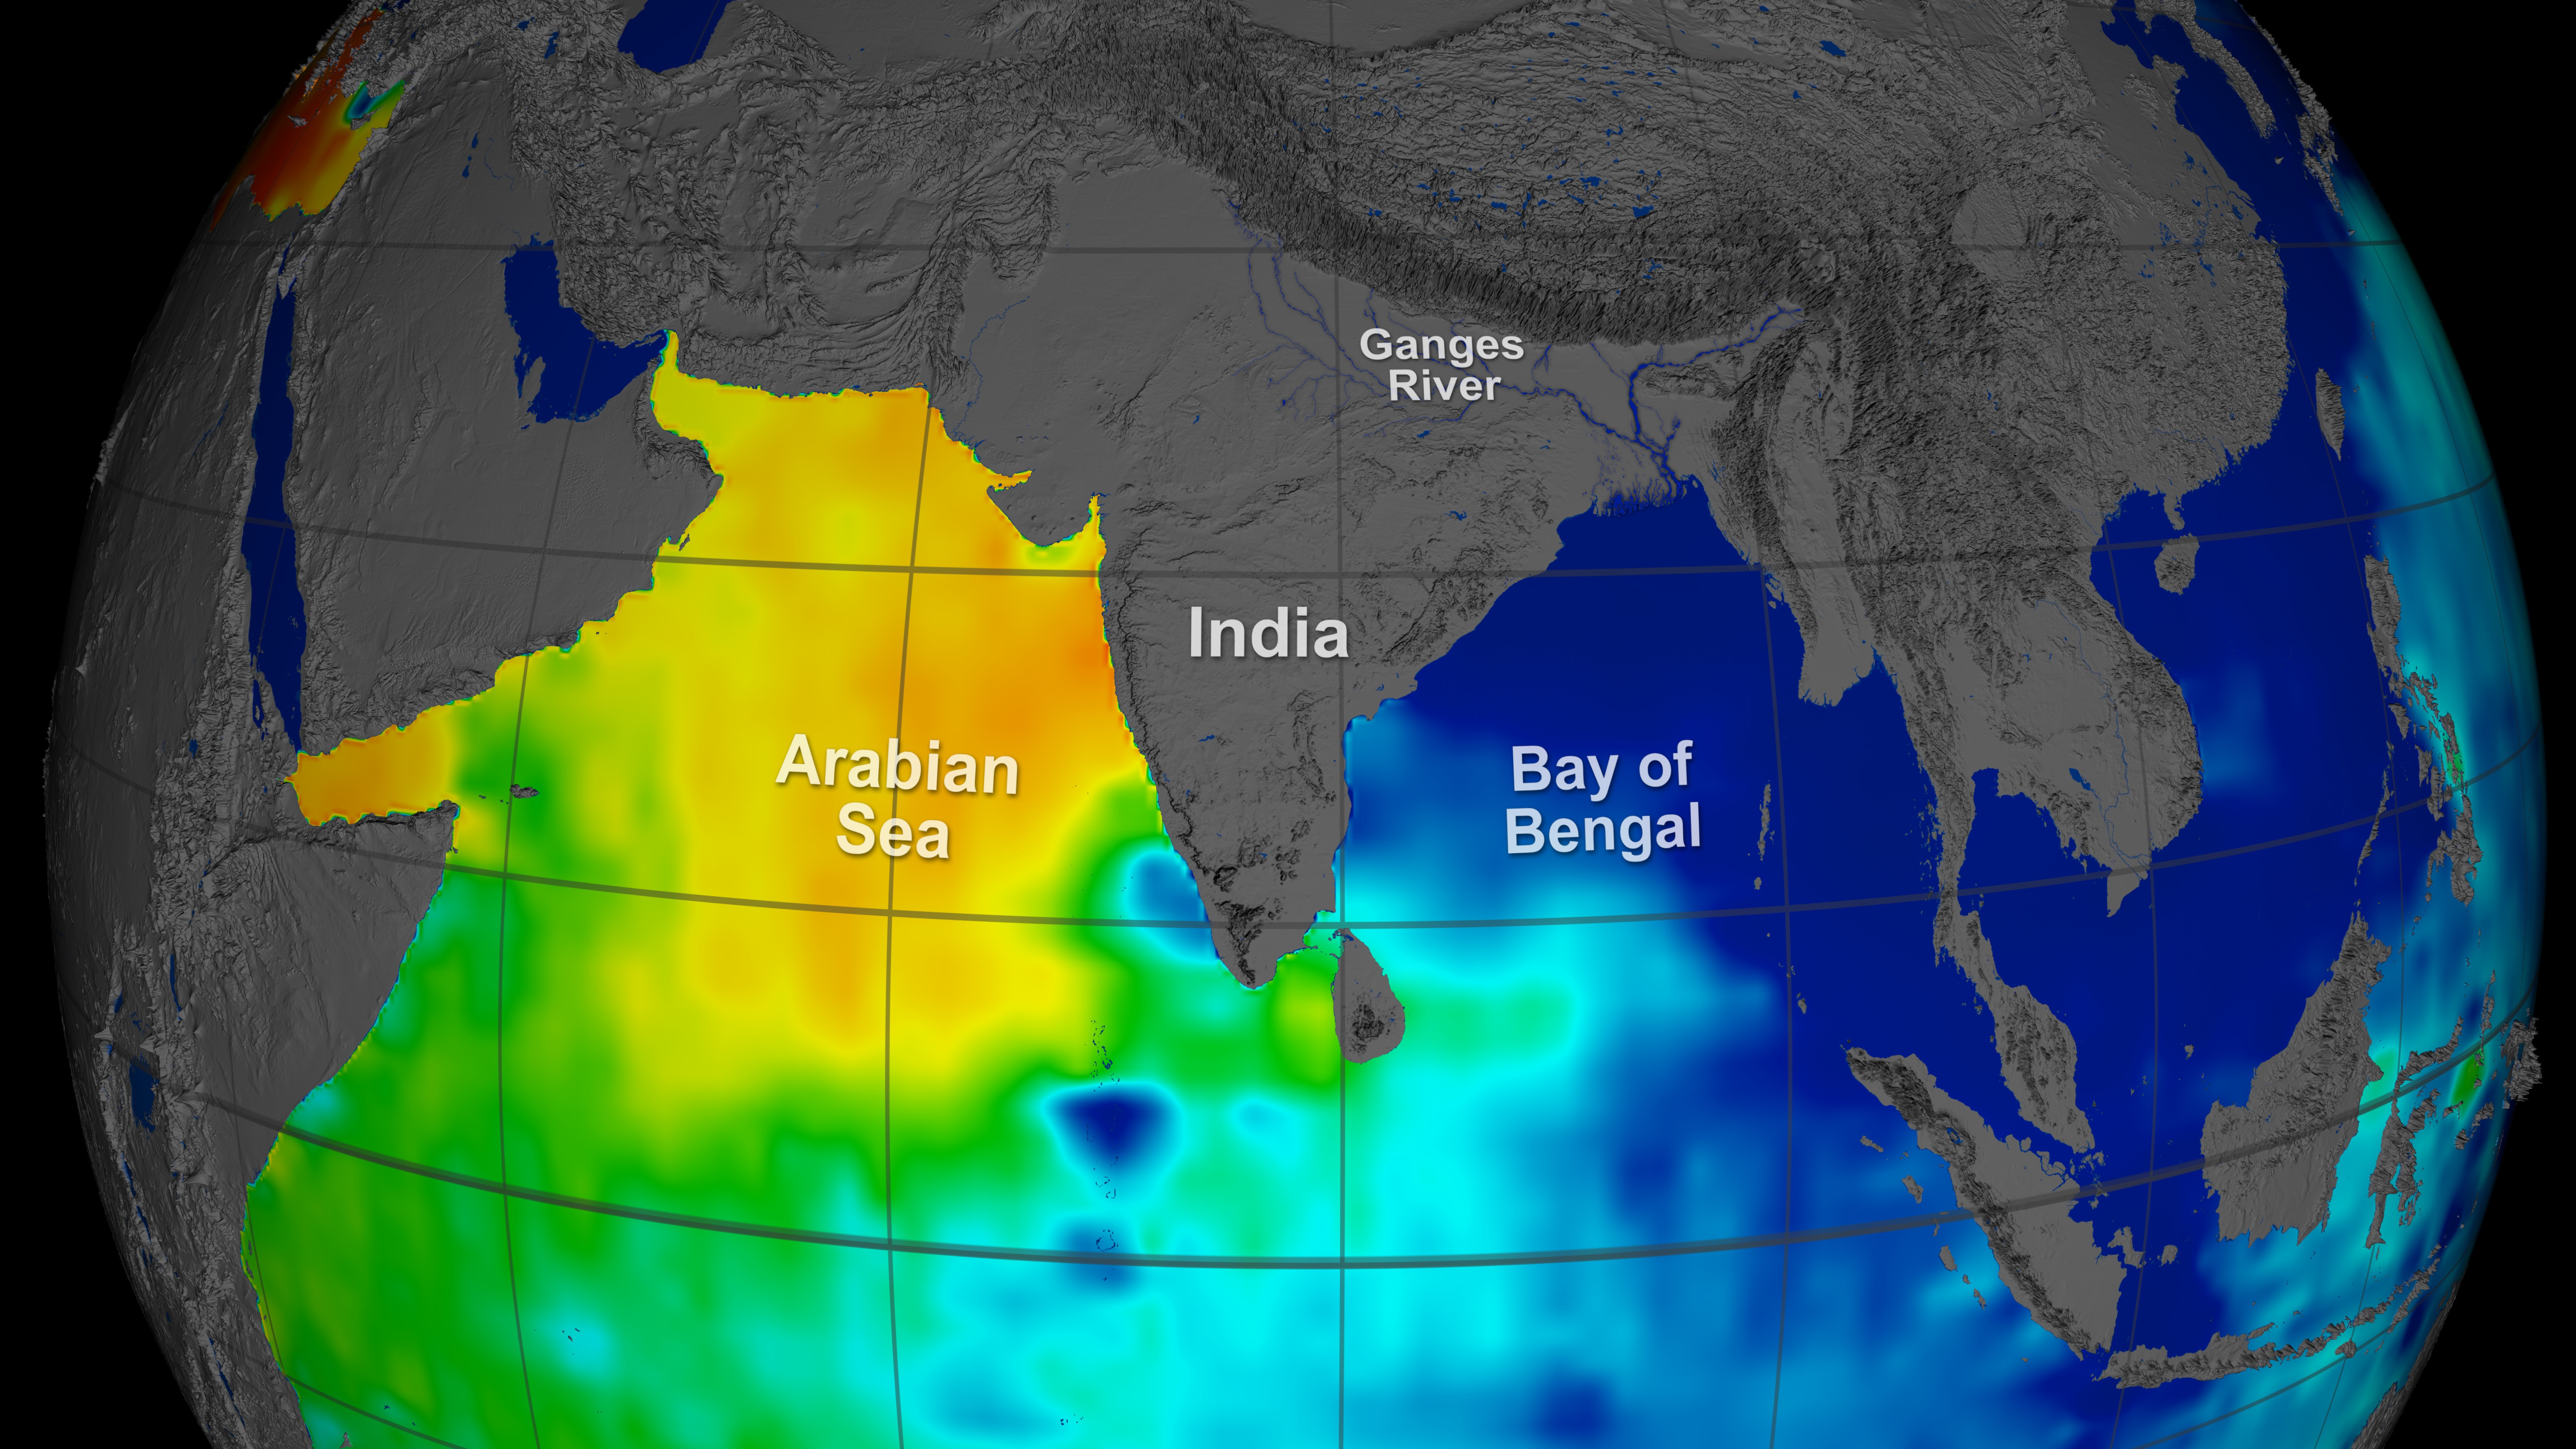 A map shows how monsoon rains and freshwater flowing into the Bay of Bengal keep it far less salty than the Arabian Sea to the west. (Areas of low and high salinity are shown in blue and yellow, respectively.)